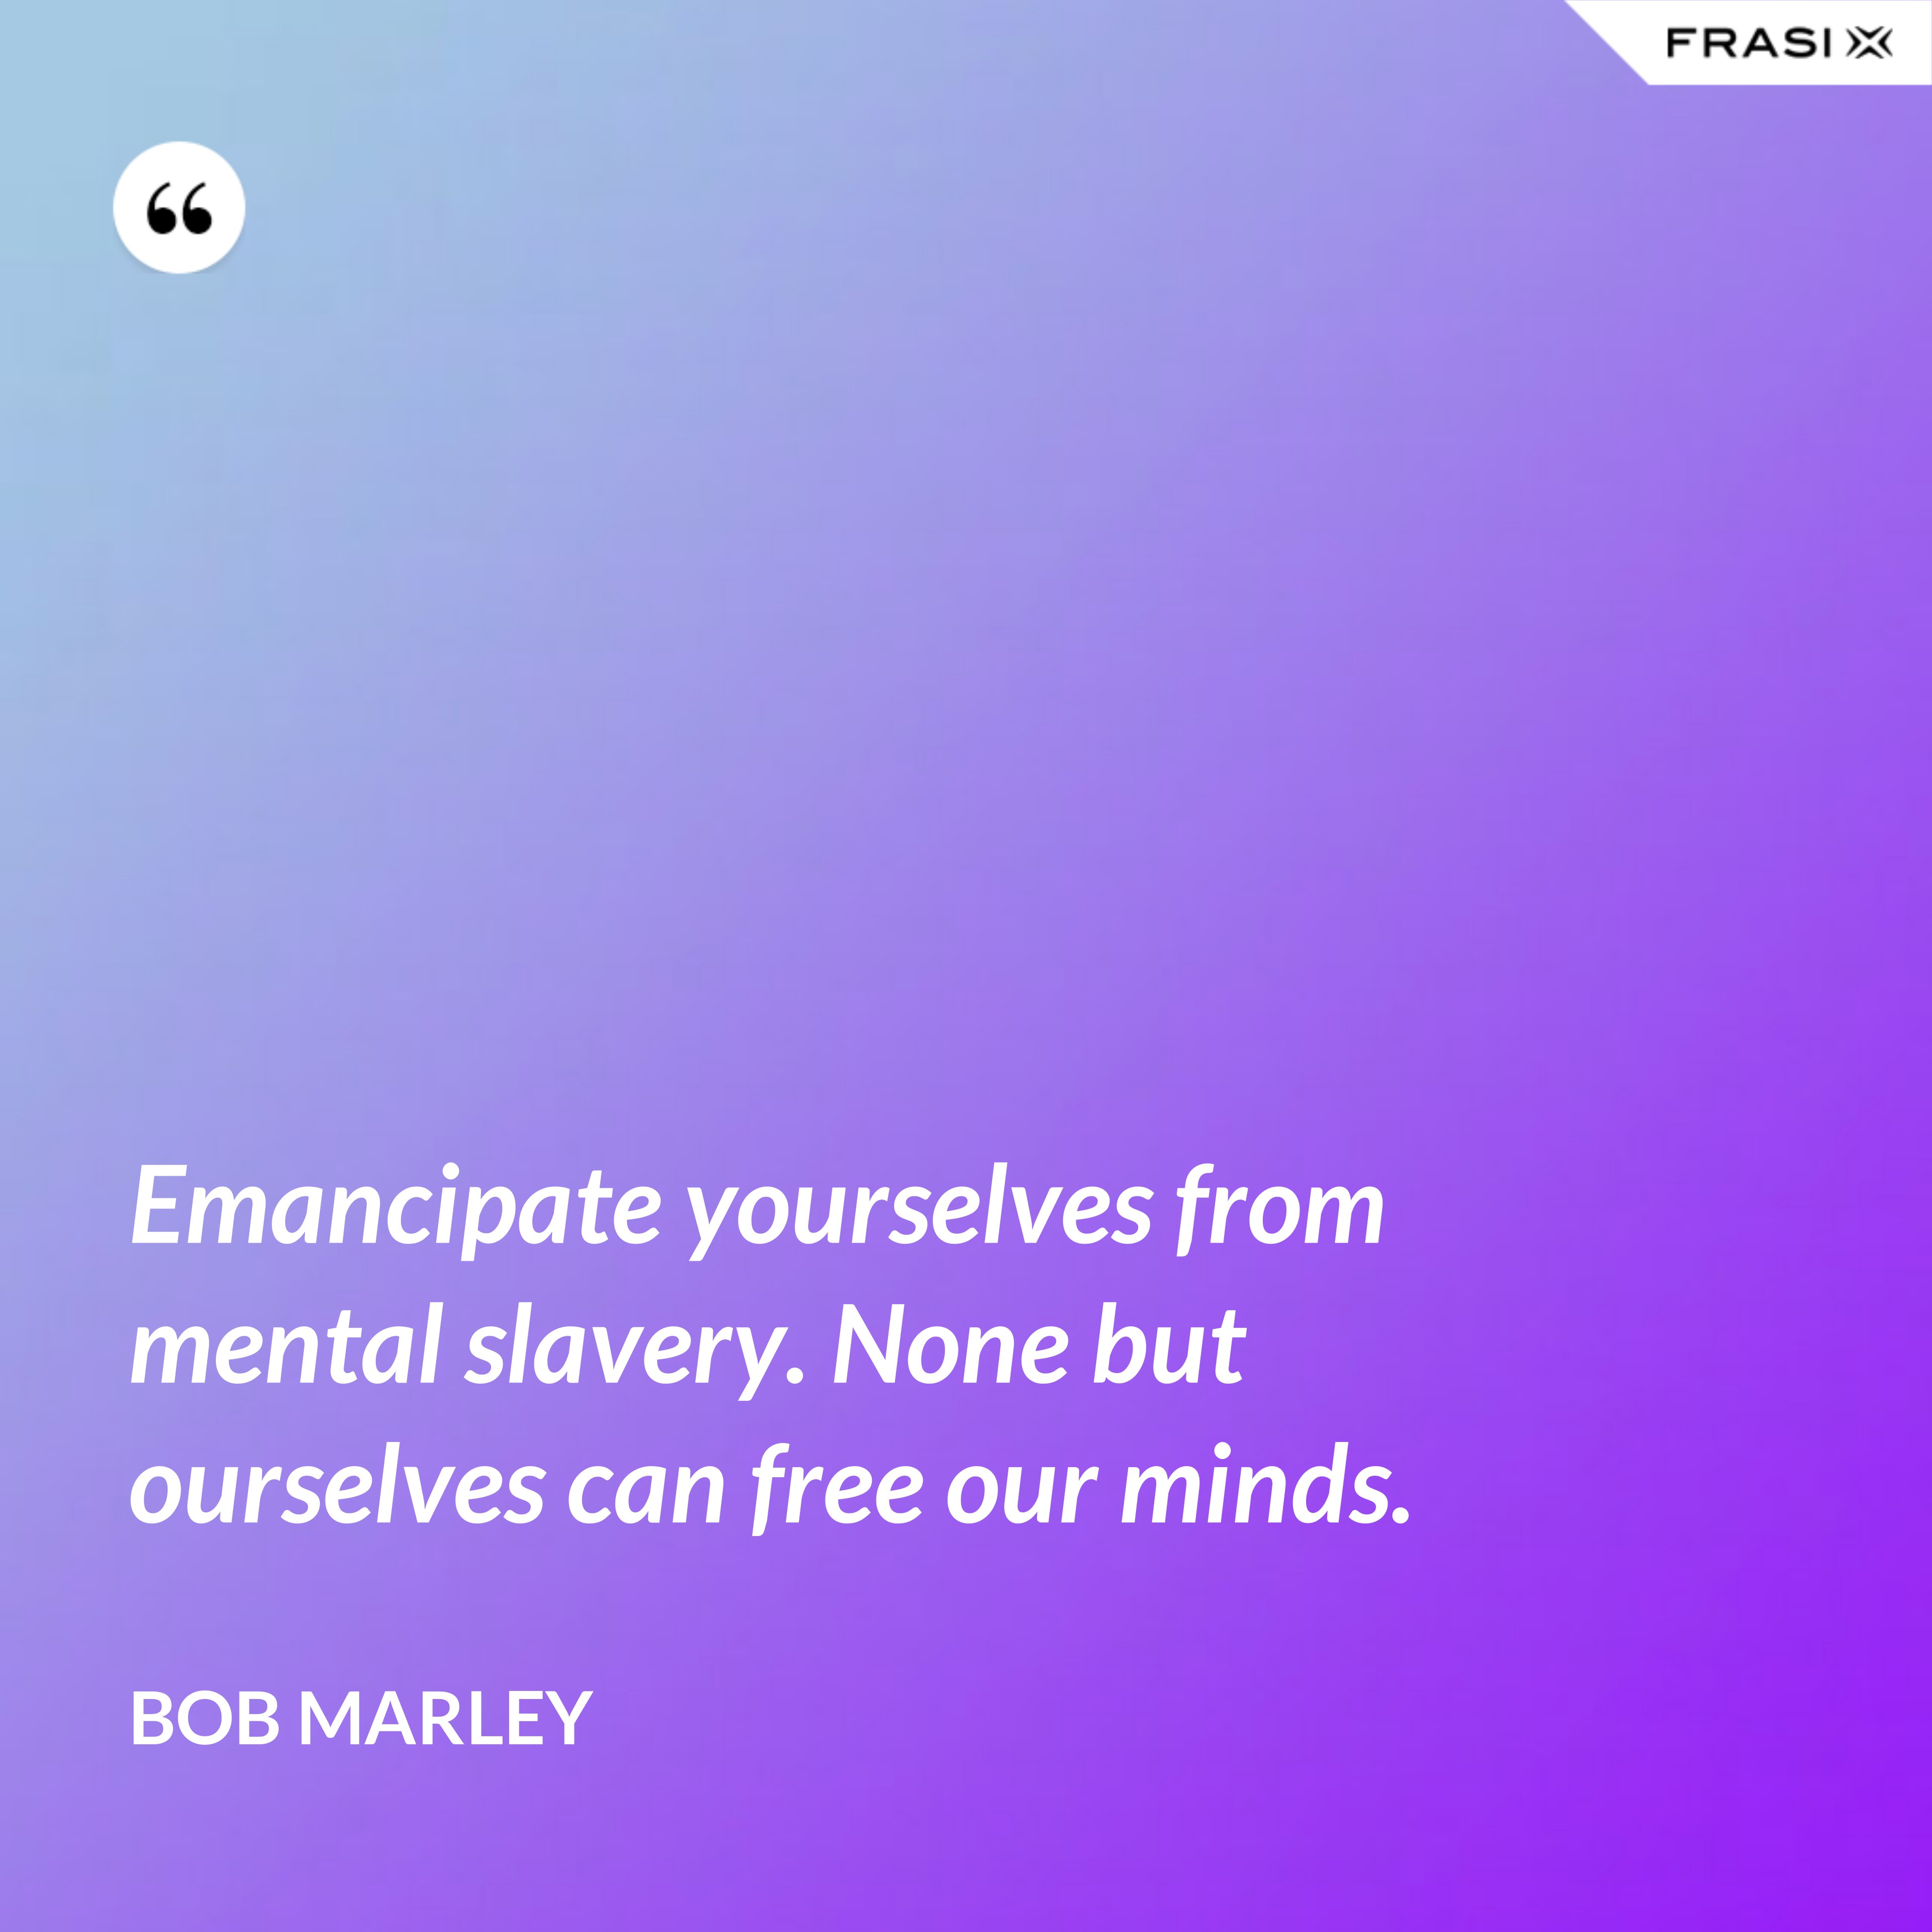 Emancipate yourselves from mental slavery. None but ourselves can free our minds. - Bob Marley